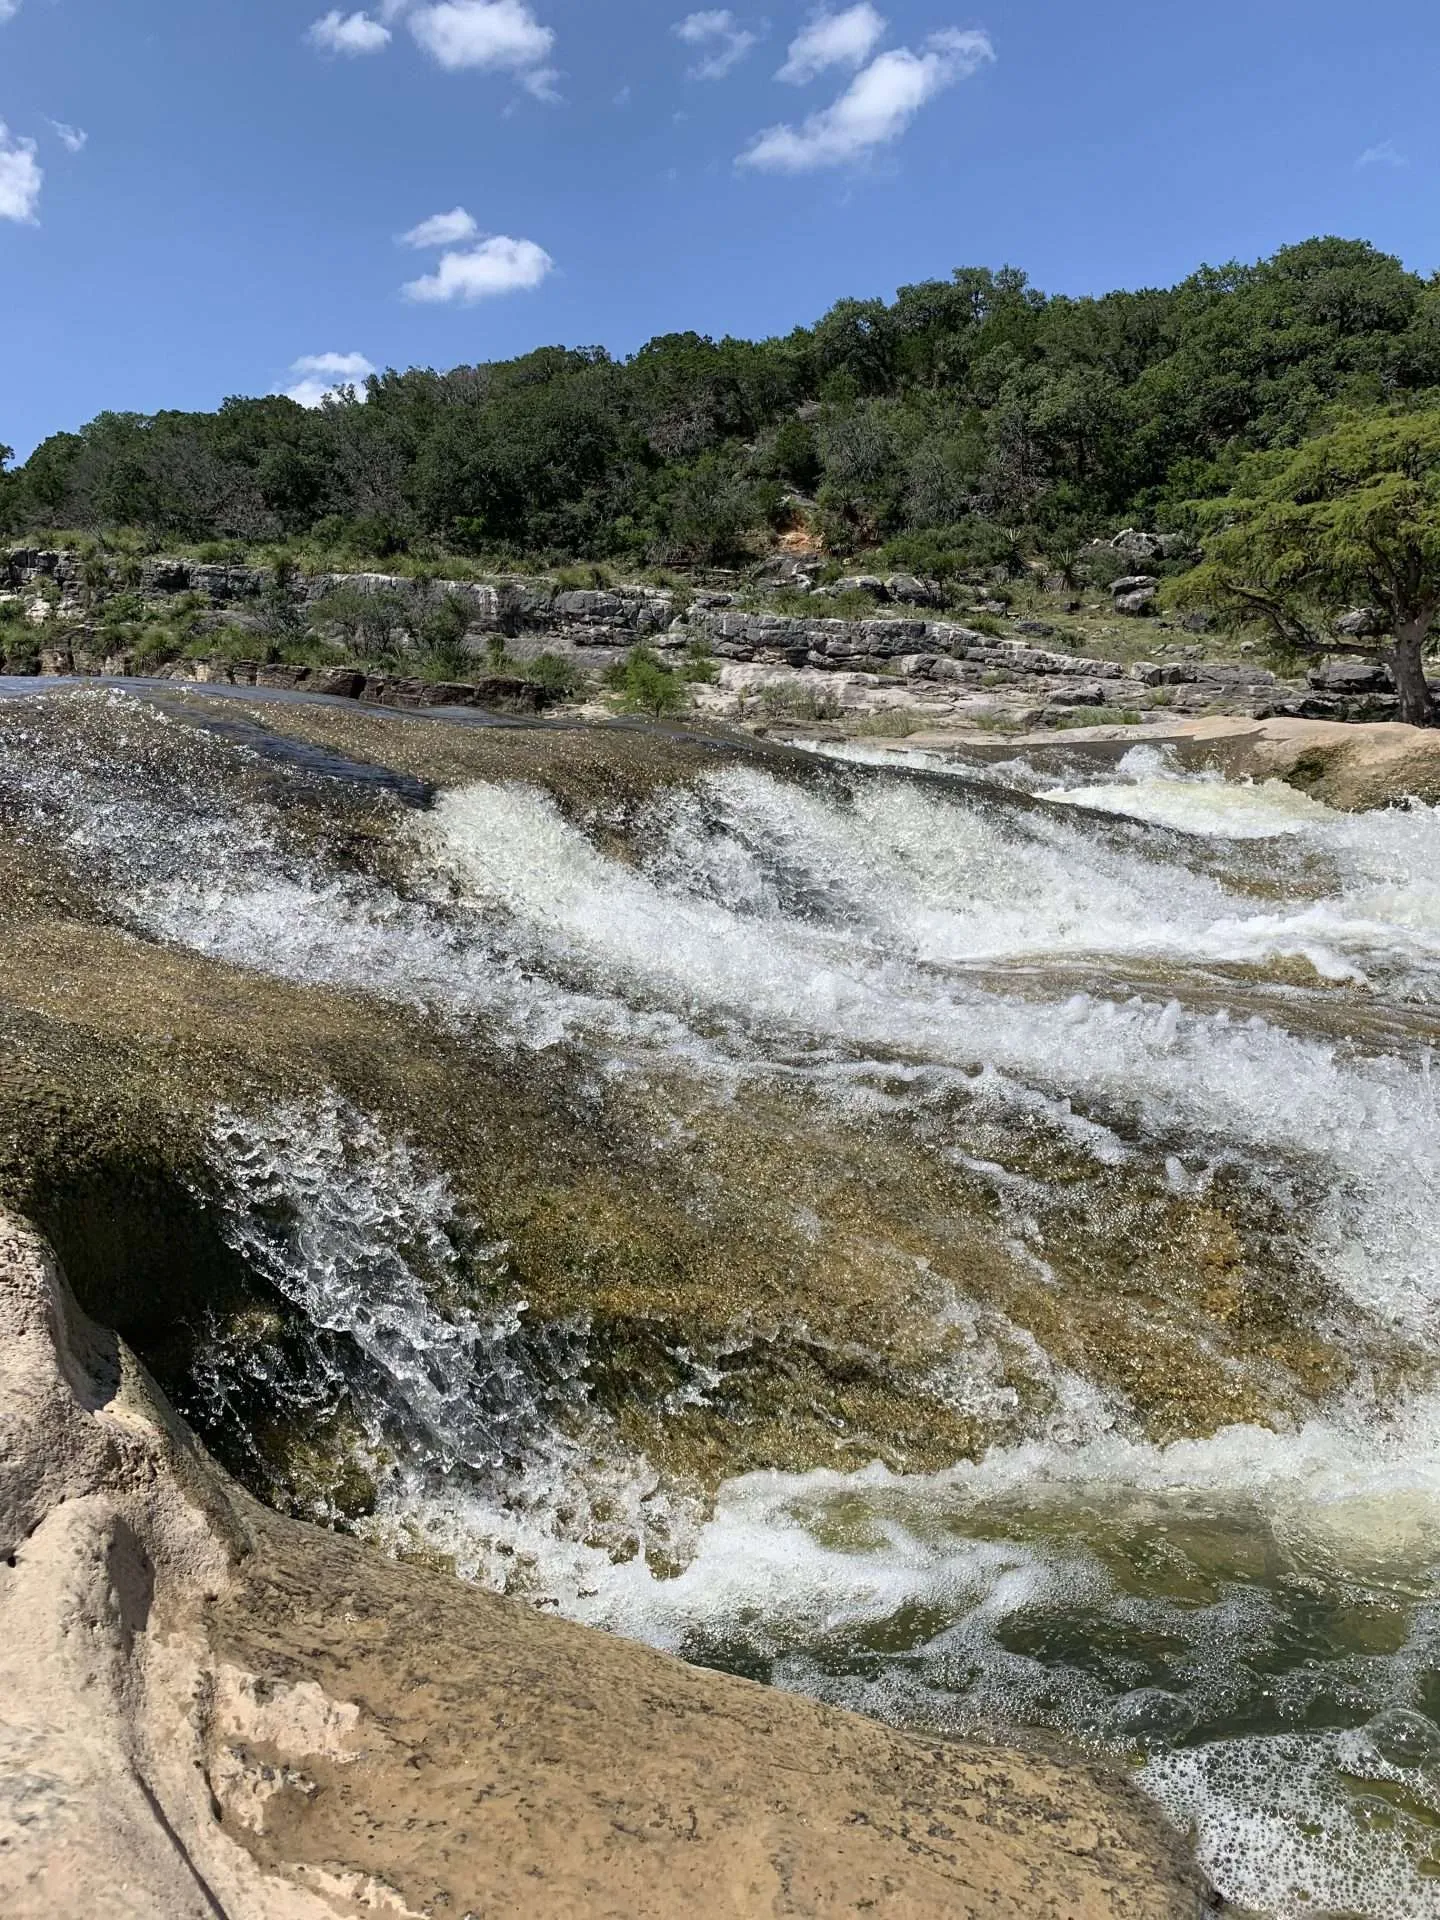 Pedernales Falls is one of the most popular waterfalls in Texas.